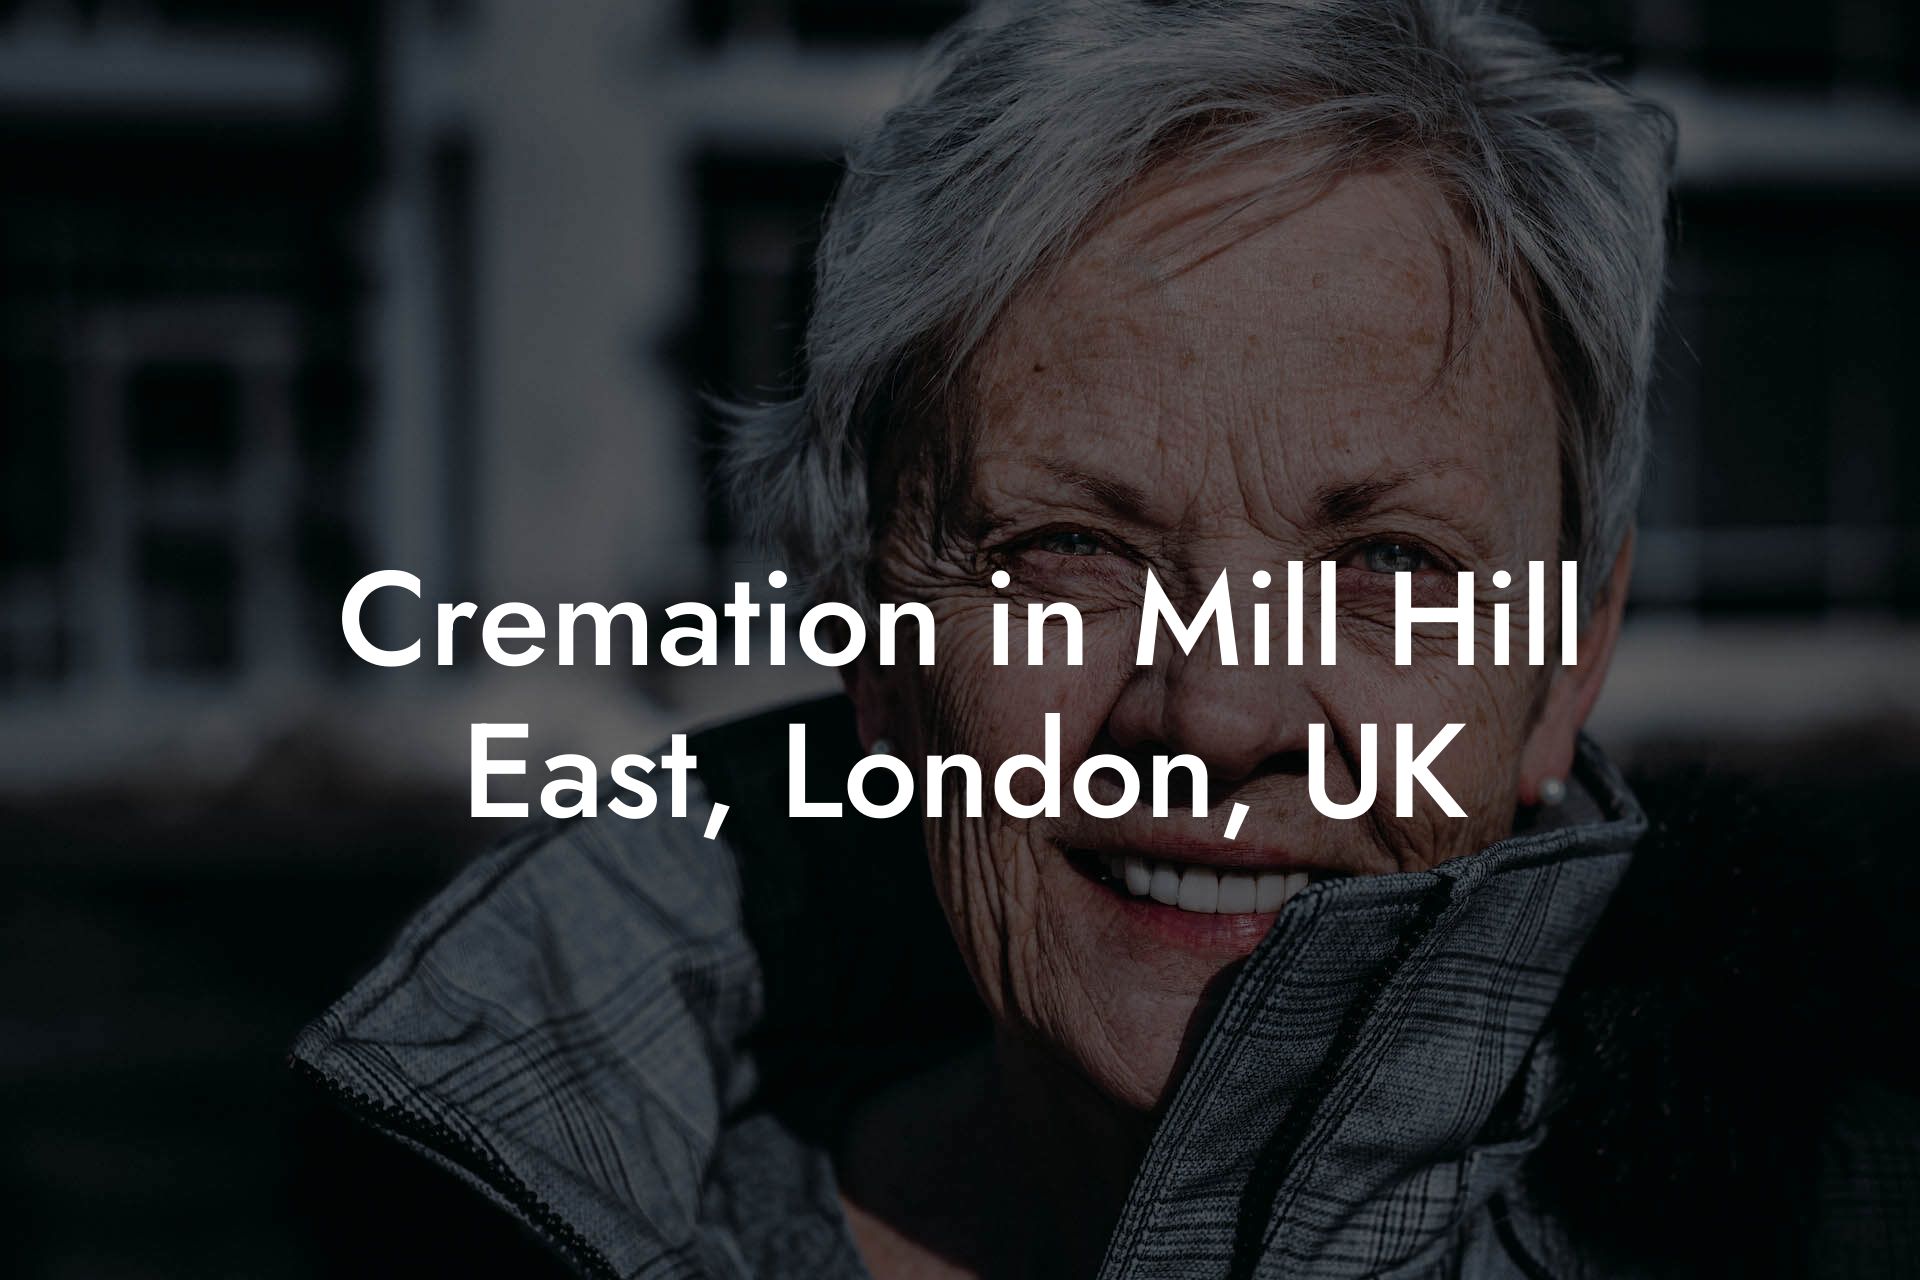 Cremation in Mill Hill East, London, UK